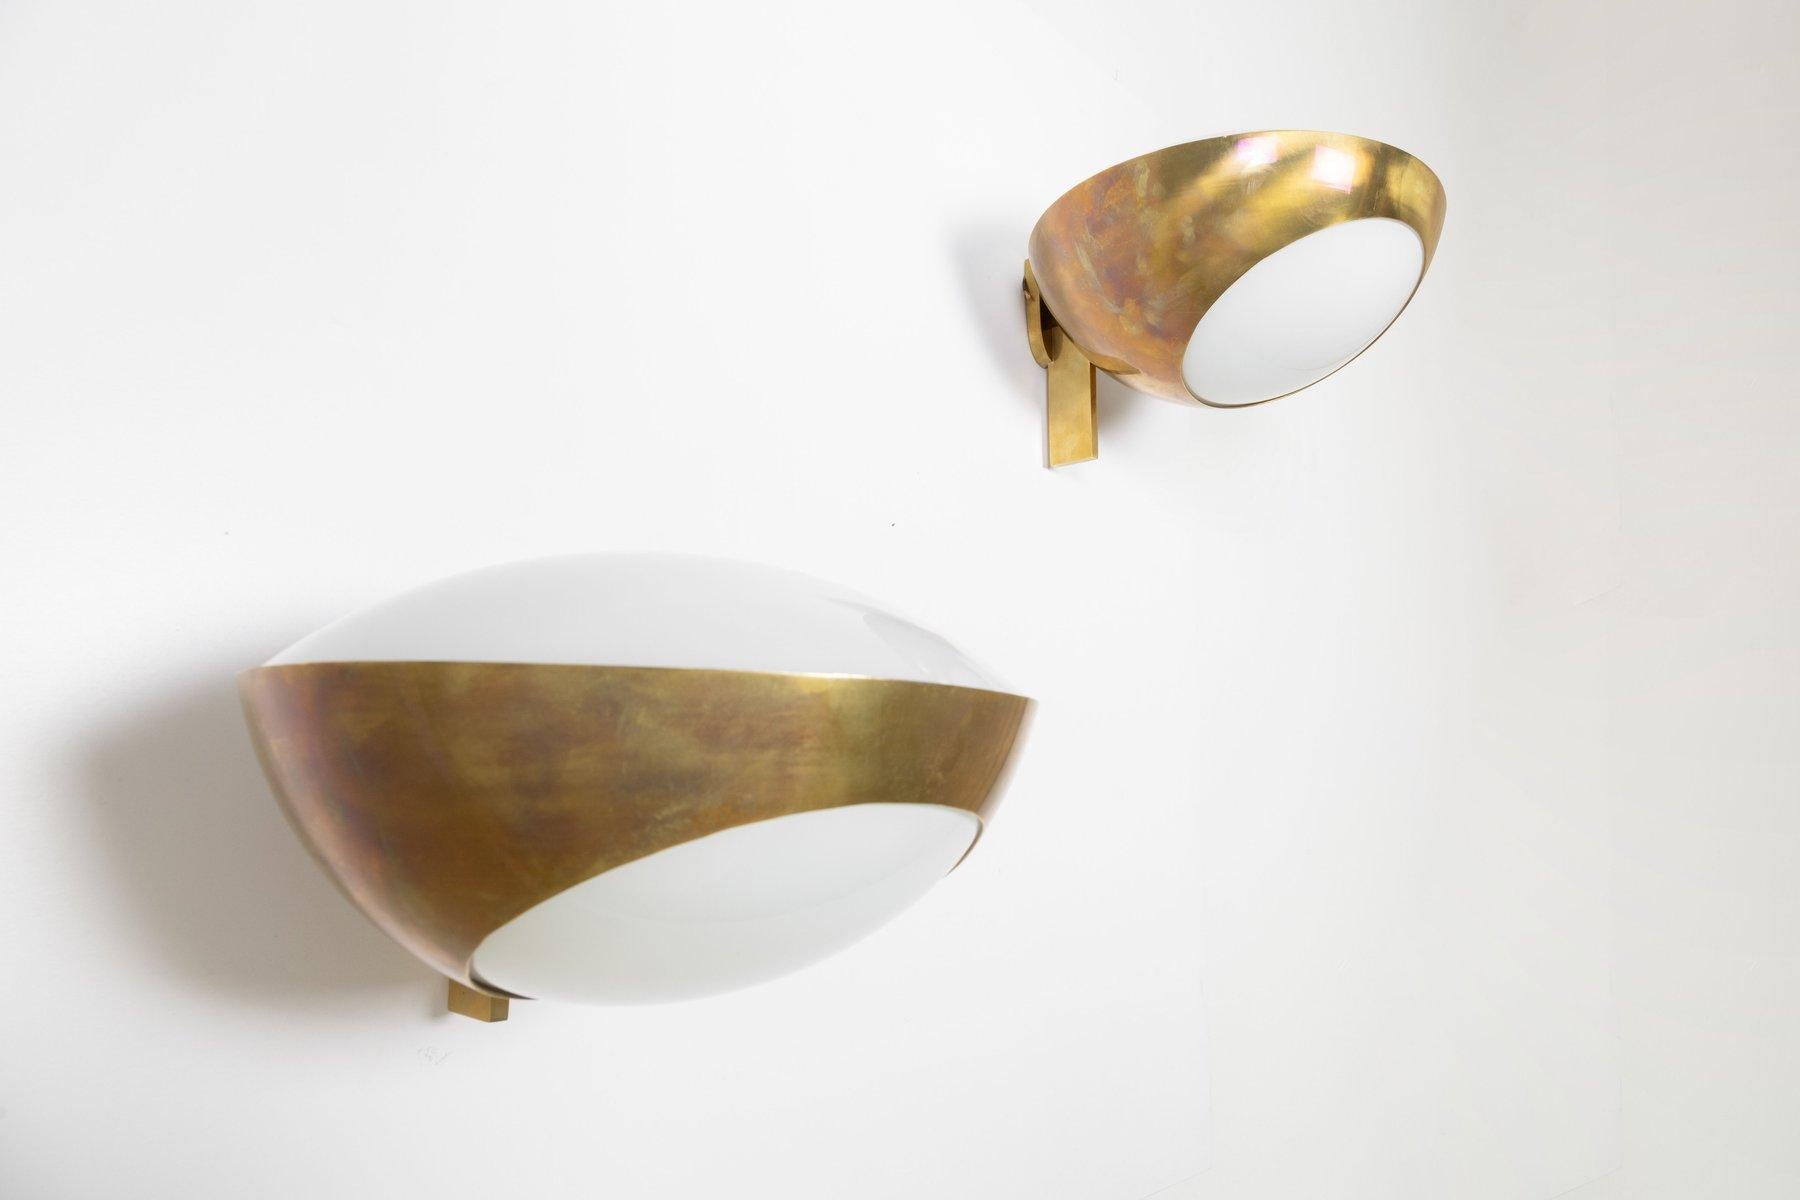 Pair of brass and glass wall sconces, produced by Fontana Arte and designed by Max Ingrand, made in the 1970s, have been fully restored.